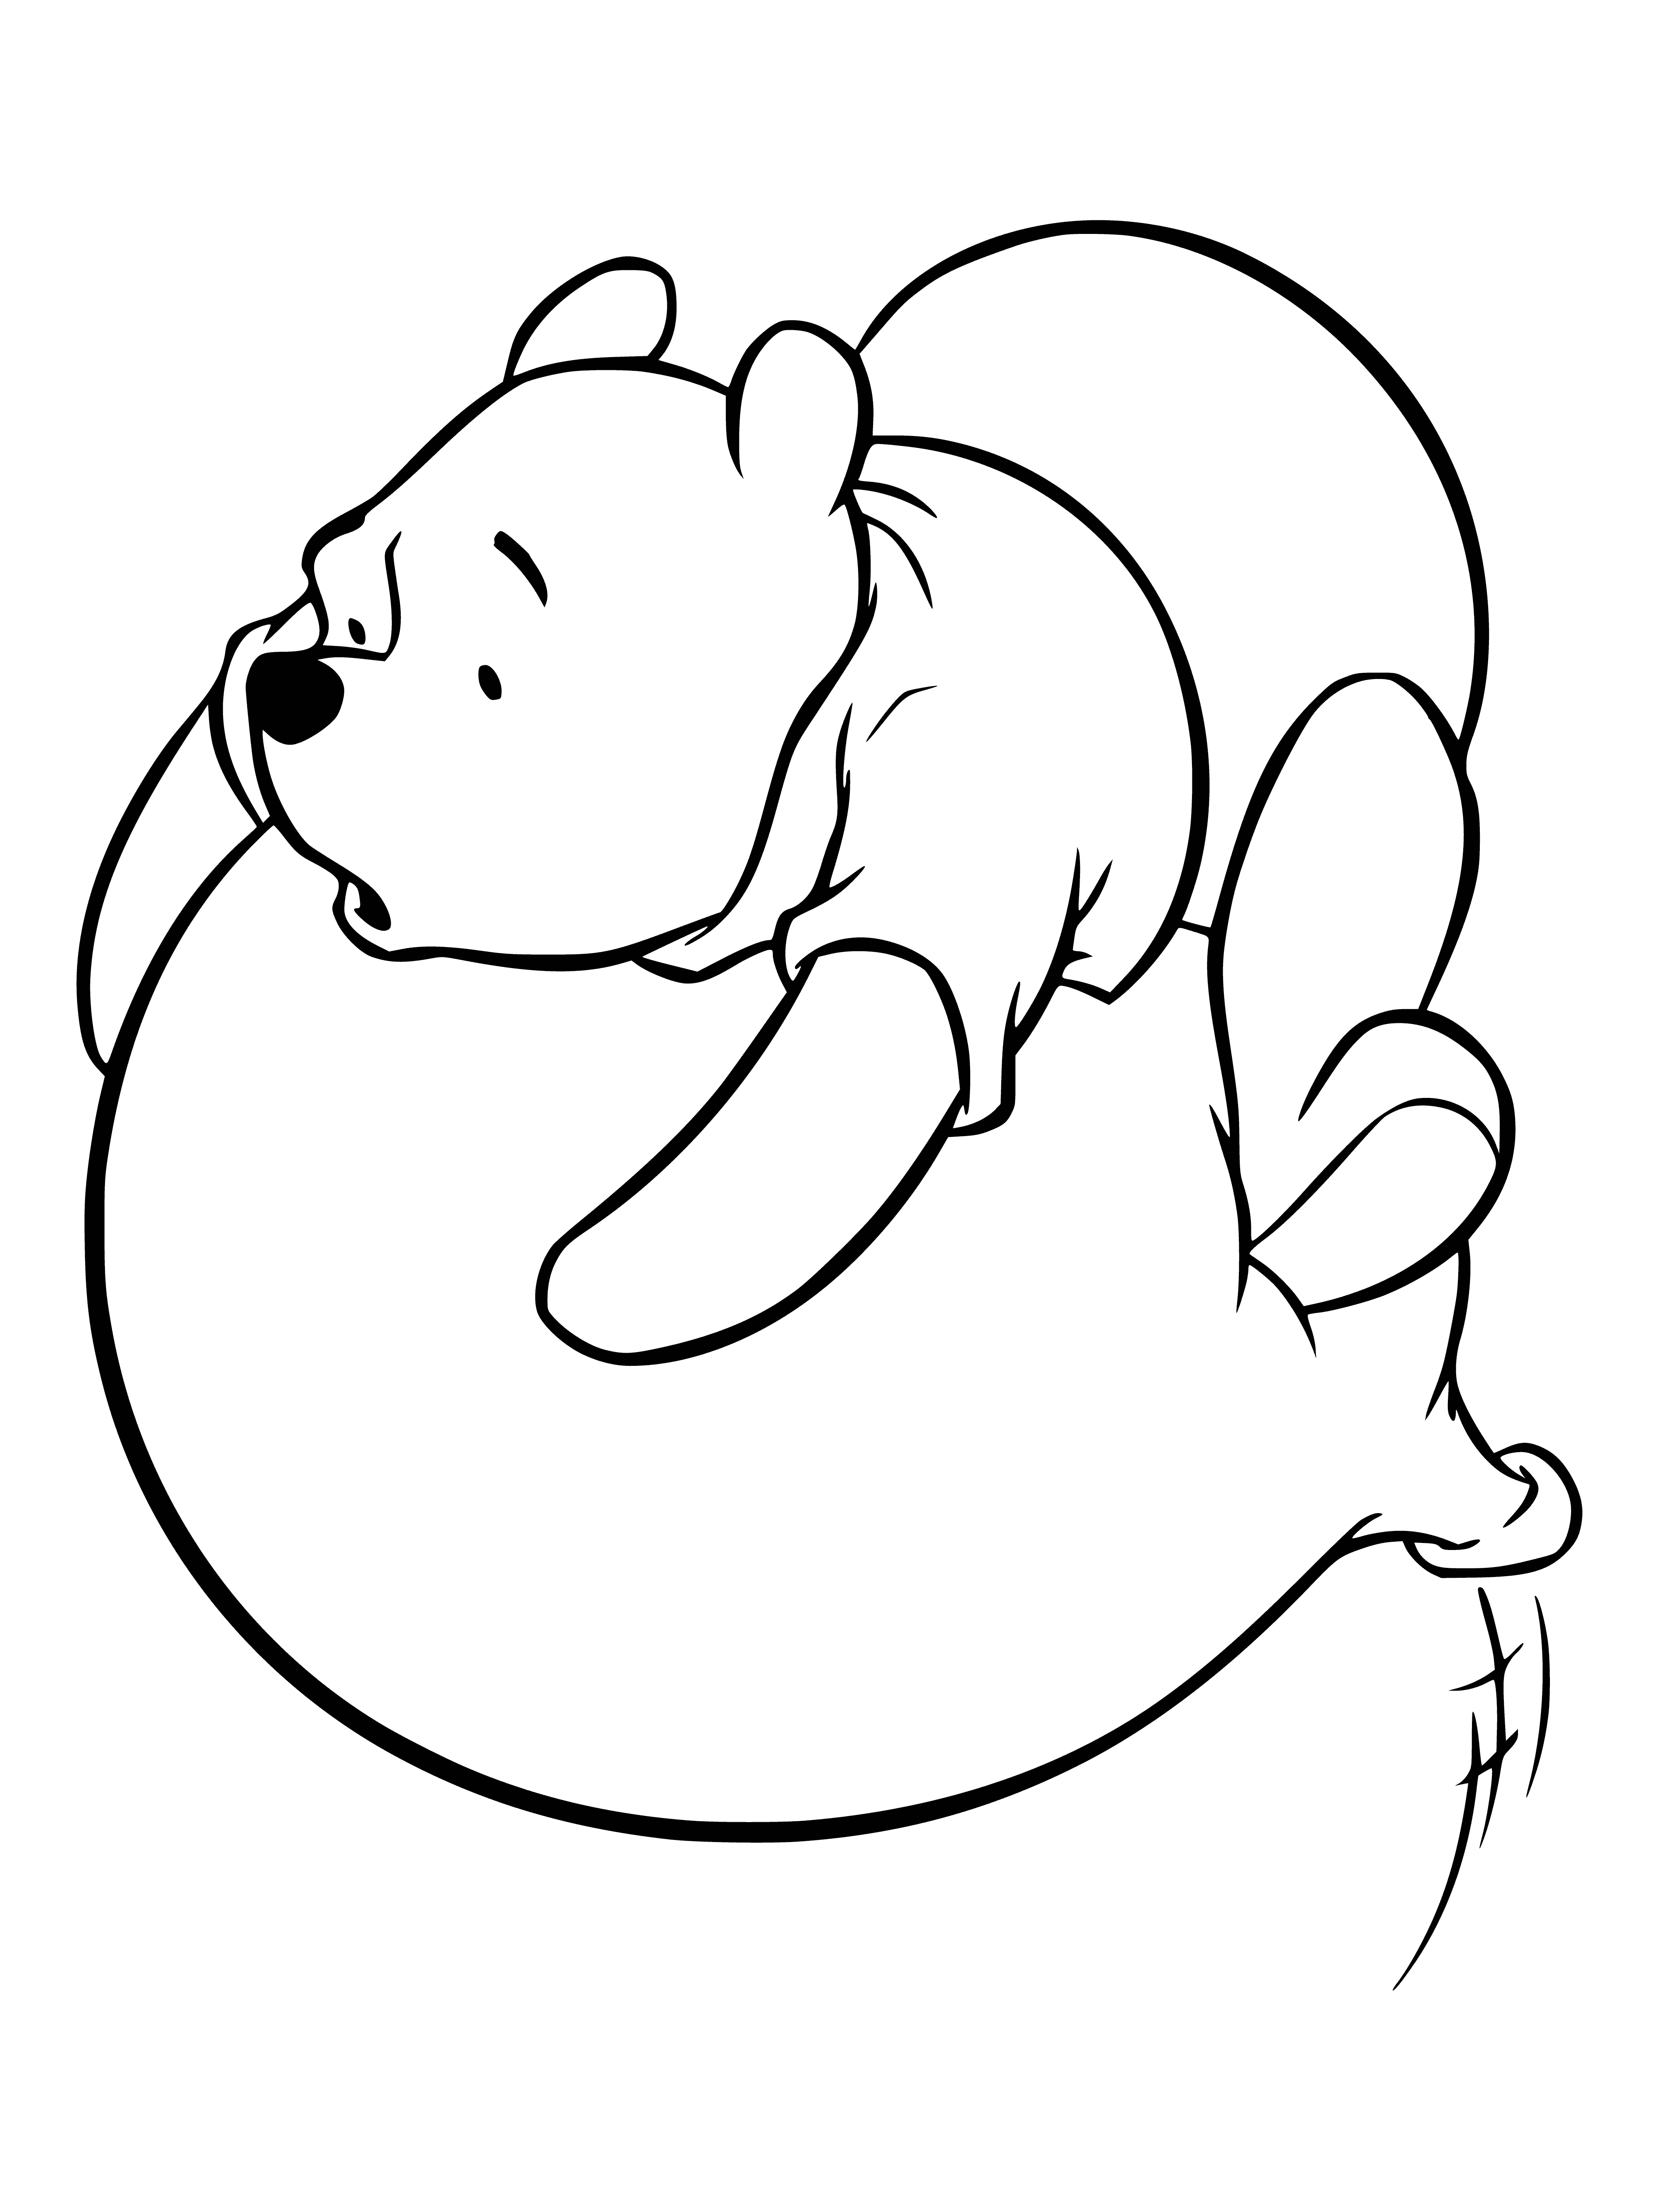 coloring page: Small teddy bear in red shirt on big green ball in grass. #teddybear